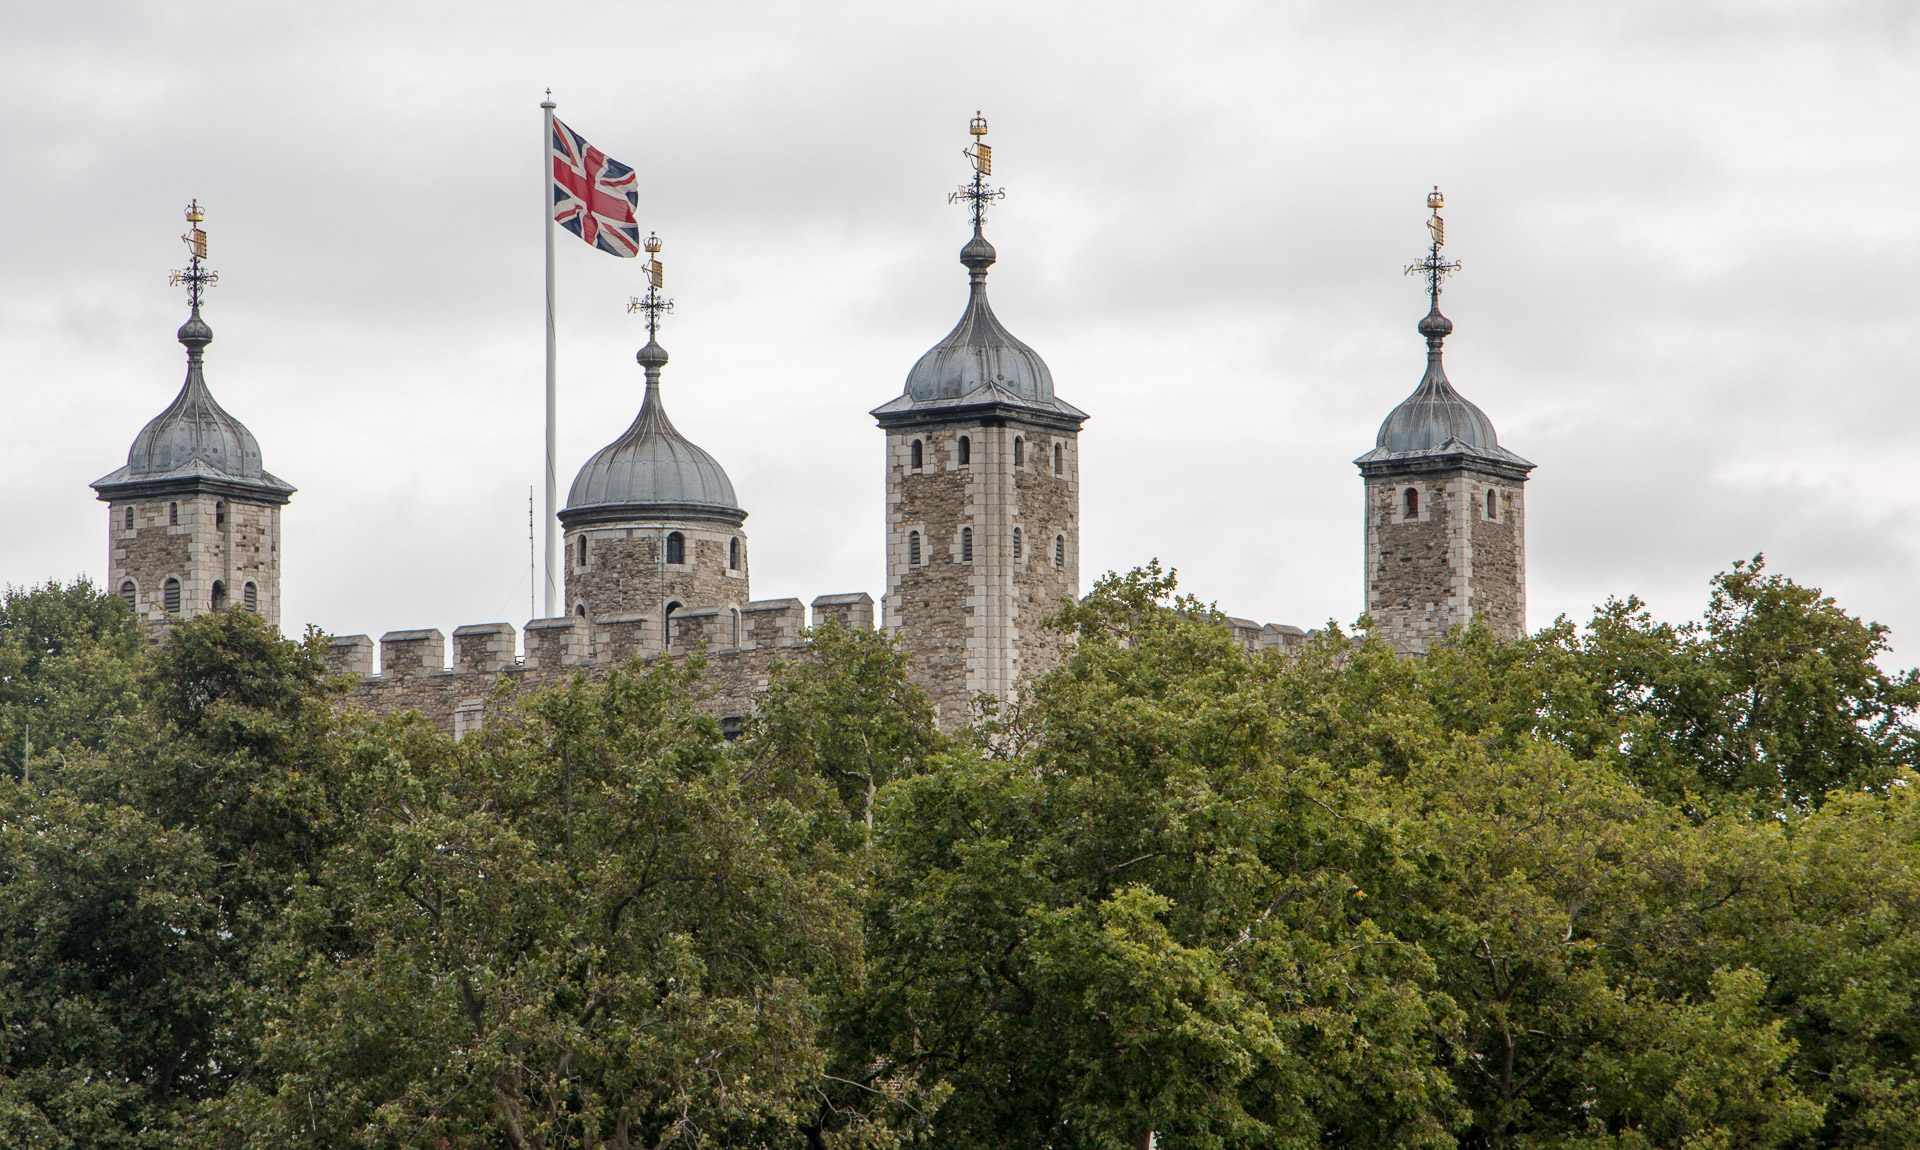 Tower of London while cruising down the Thames in London